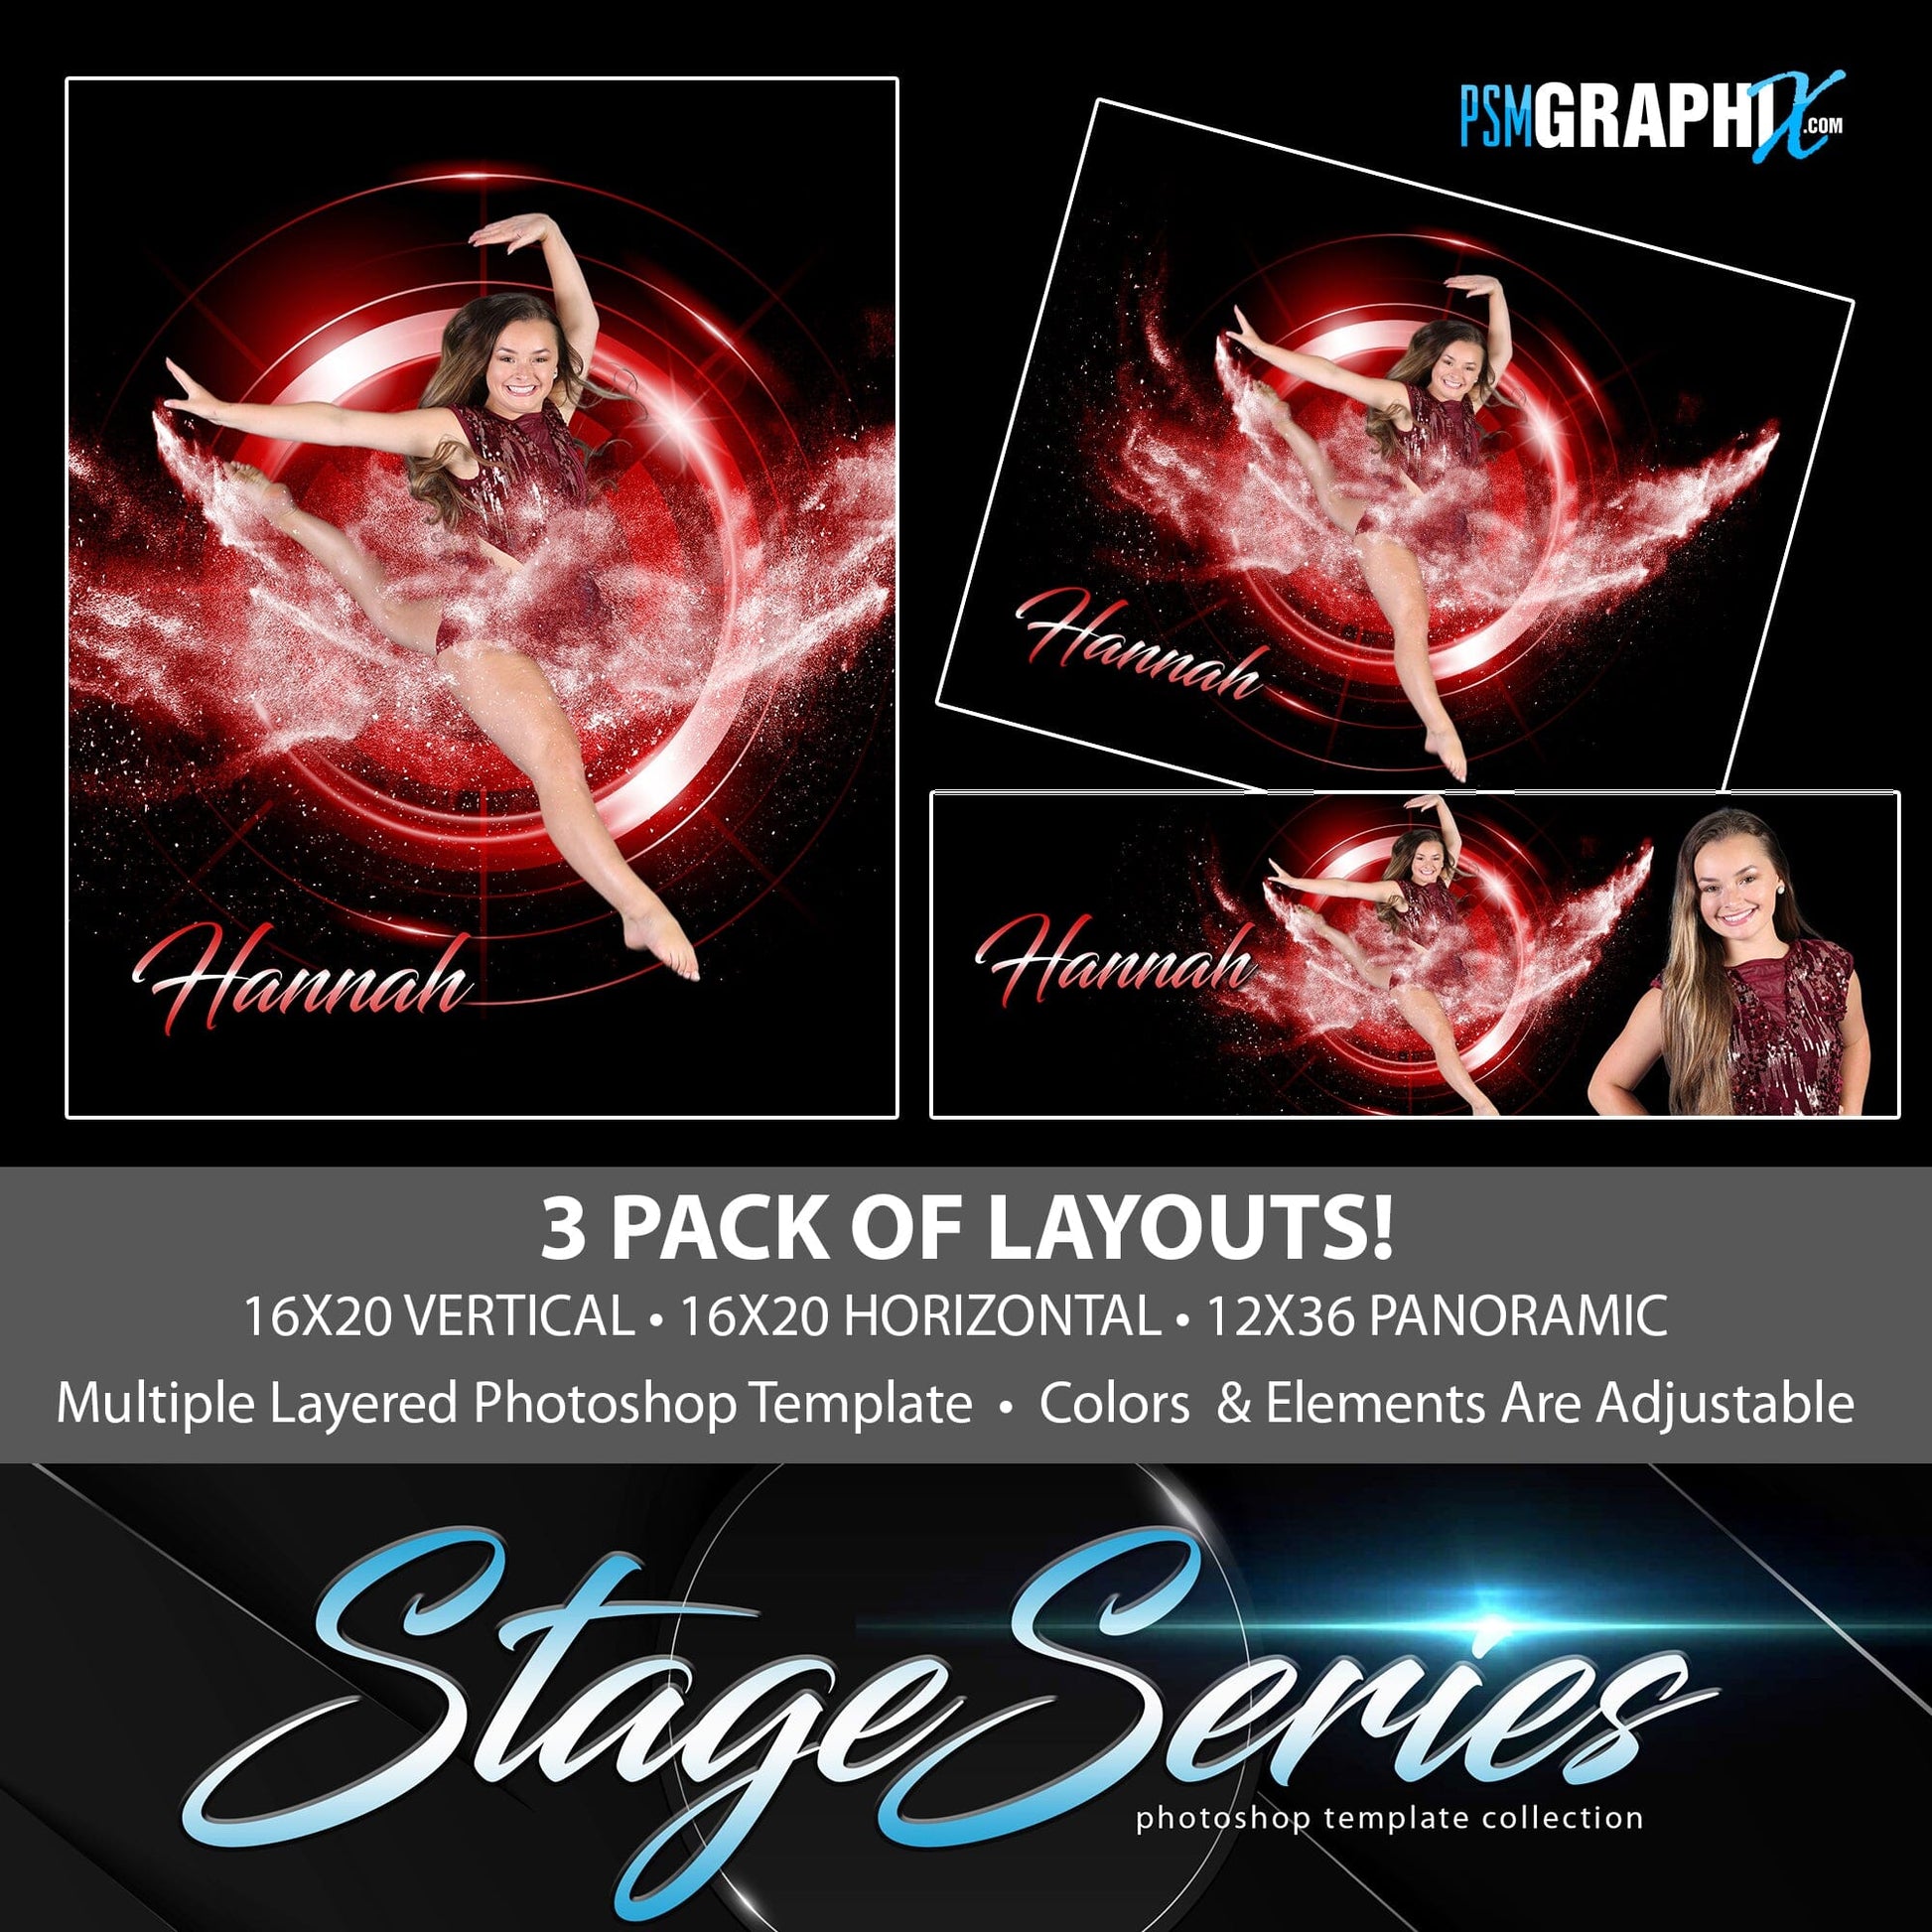 Target - Stage Series II - Photoshop Template 3 Pack-Photoshop Template - PSMGraphix